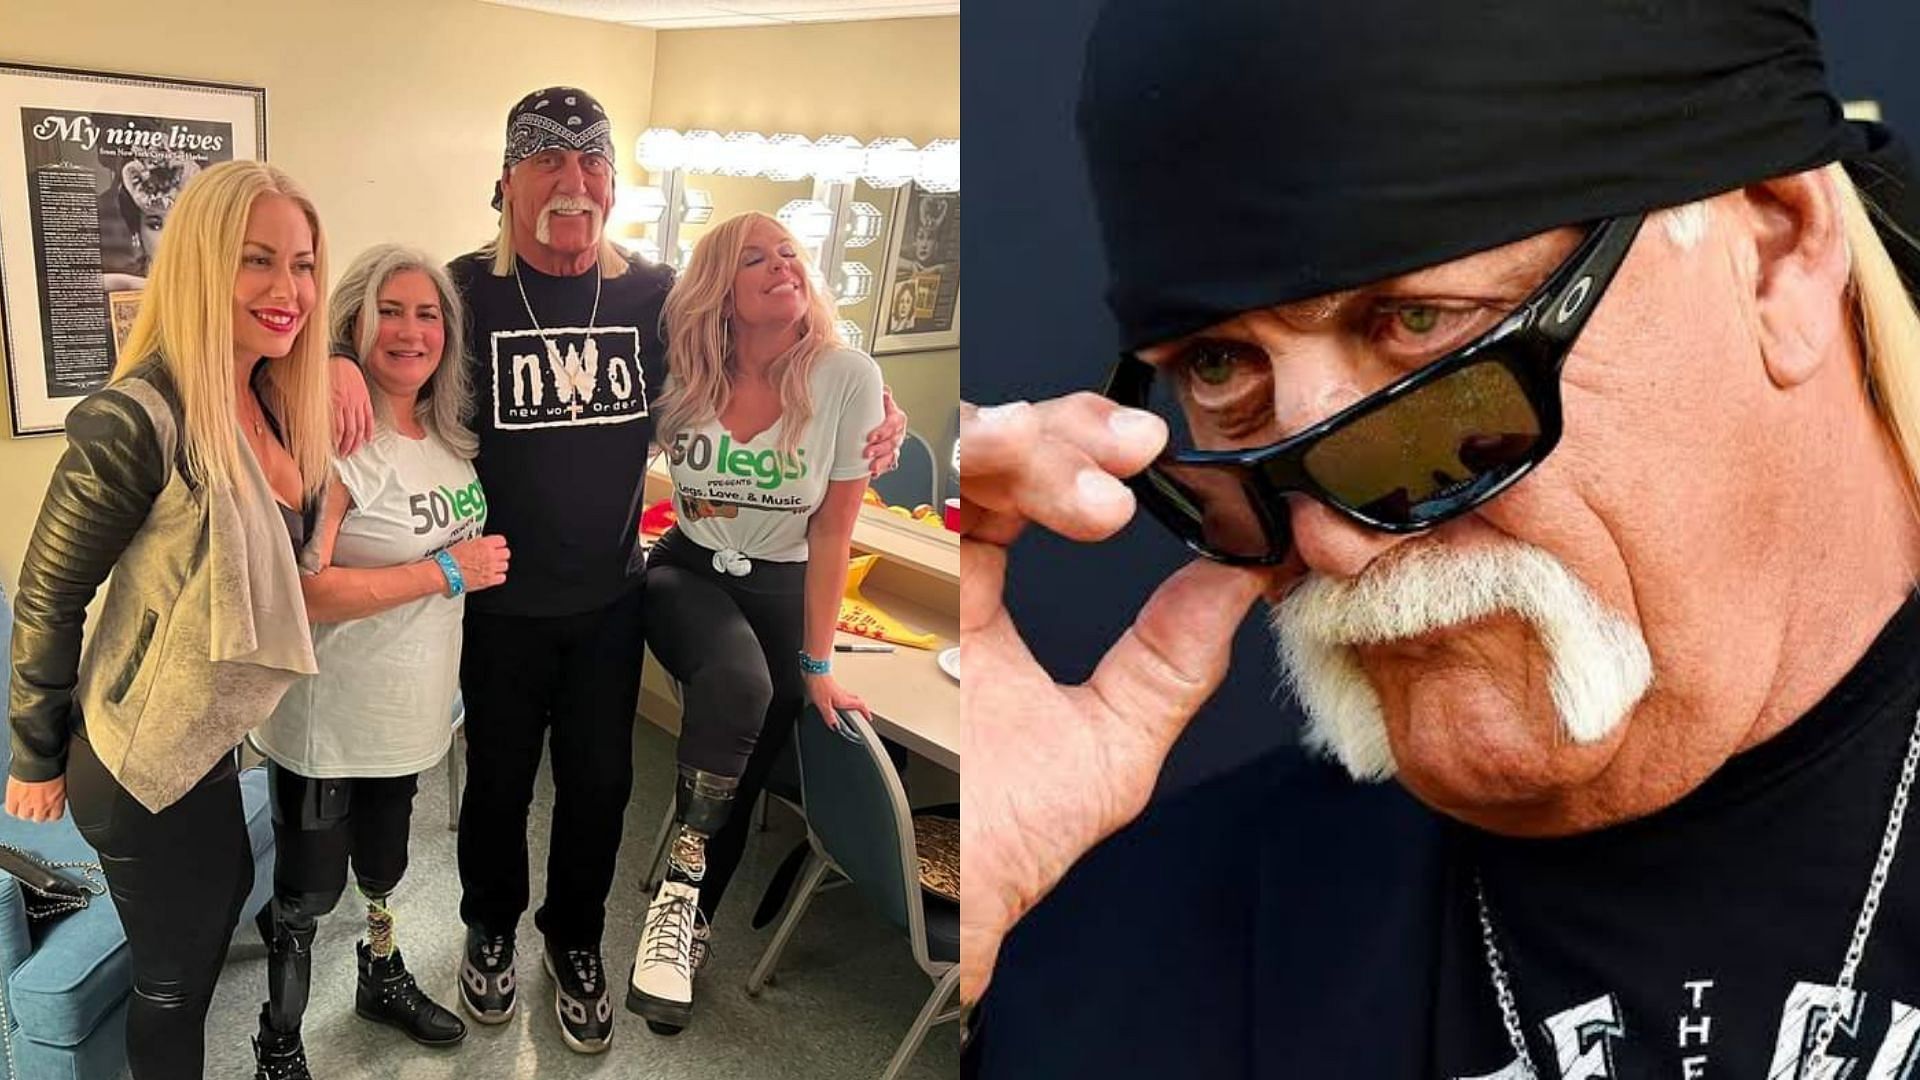 Hulk Hogan is now in a relationship with Sky Daily